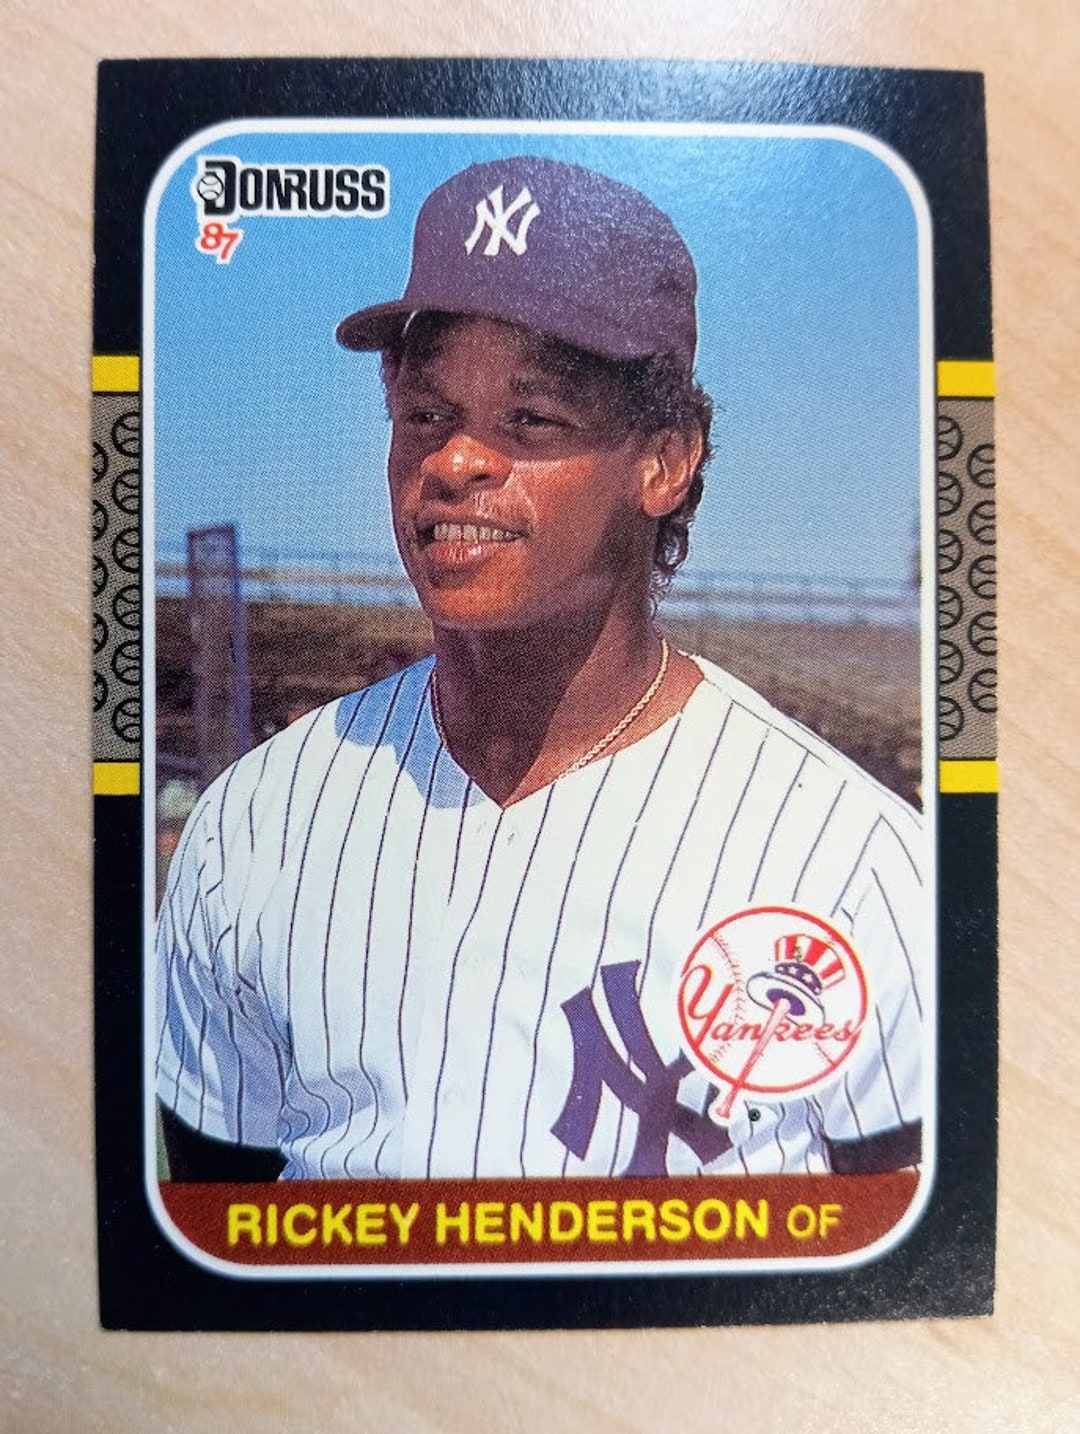 After winning 87 games in 1984, the New York Yankees added Rickey